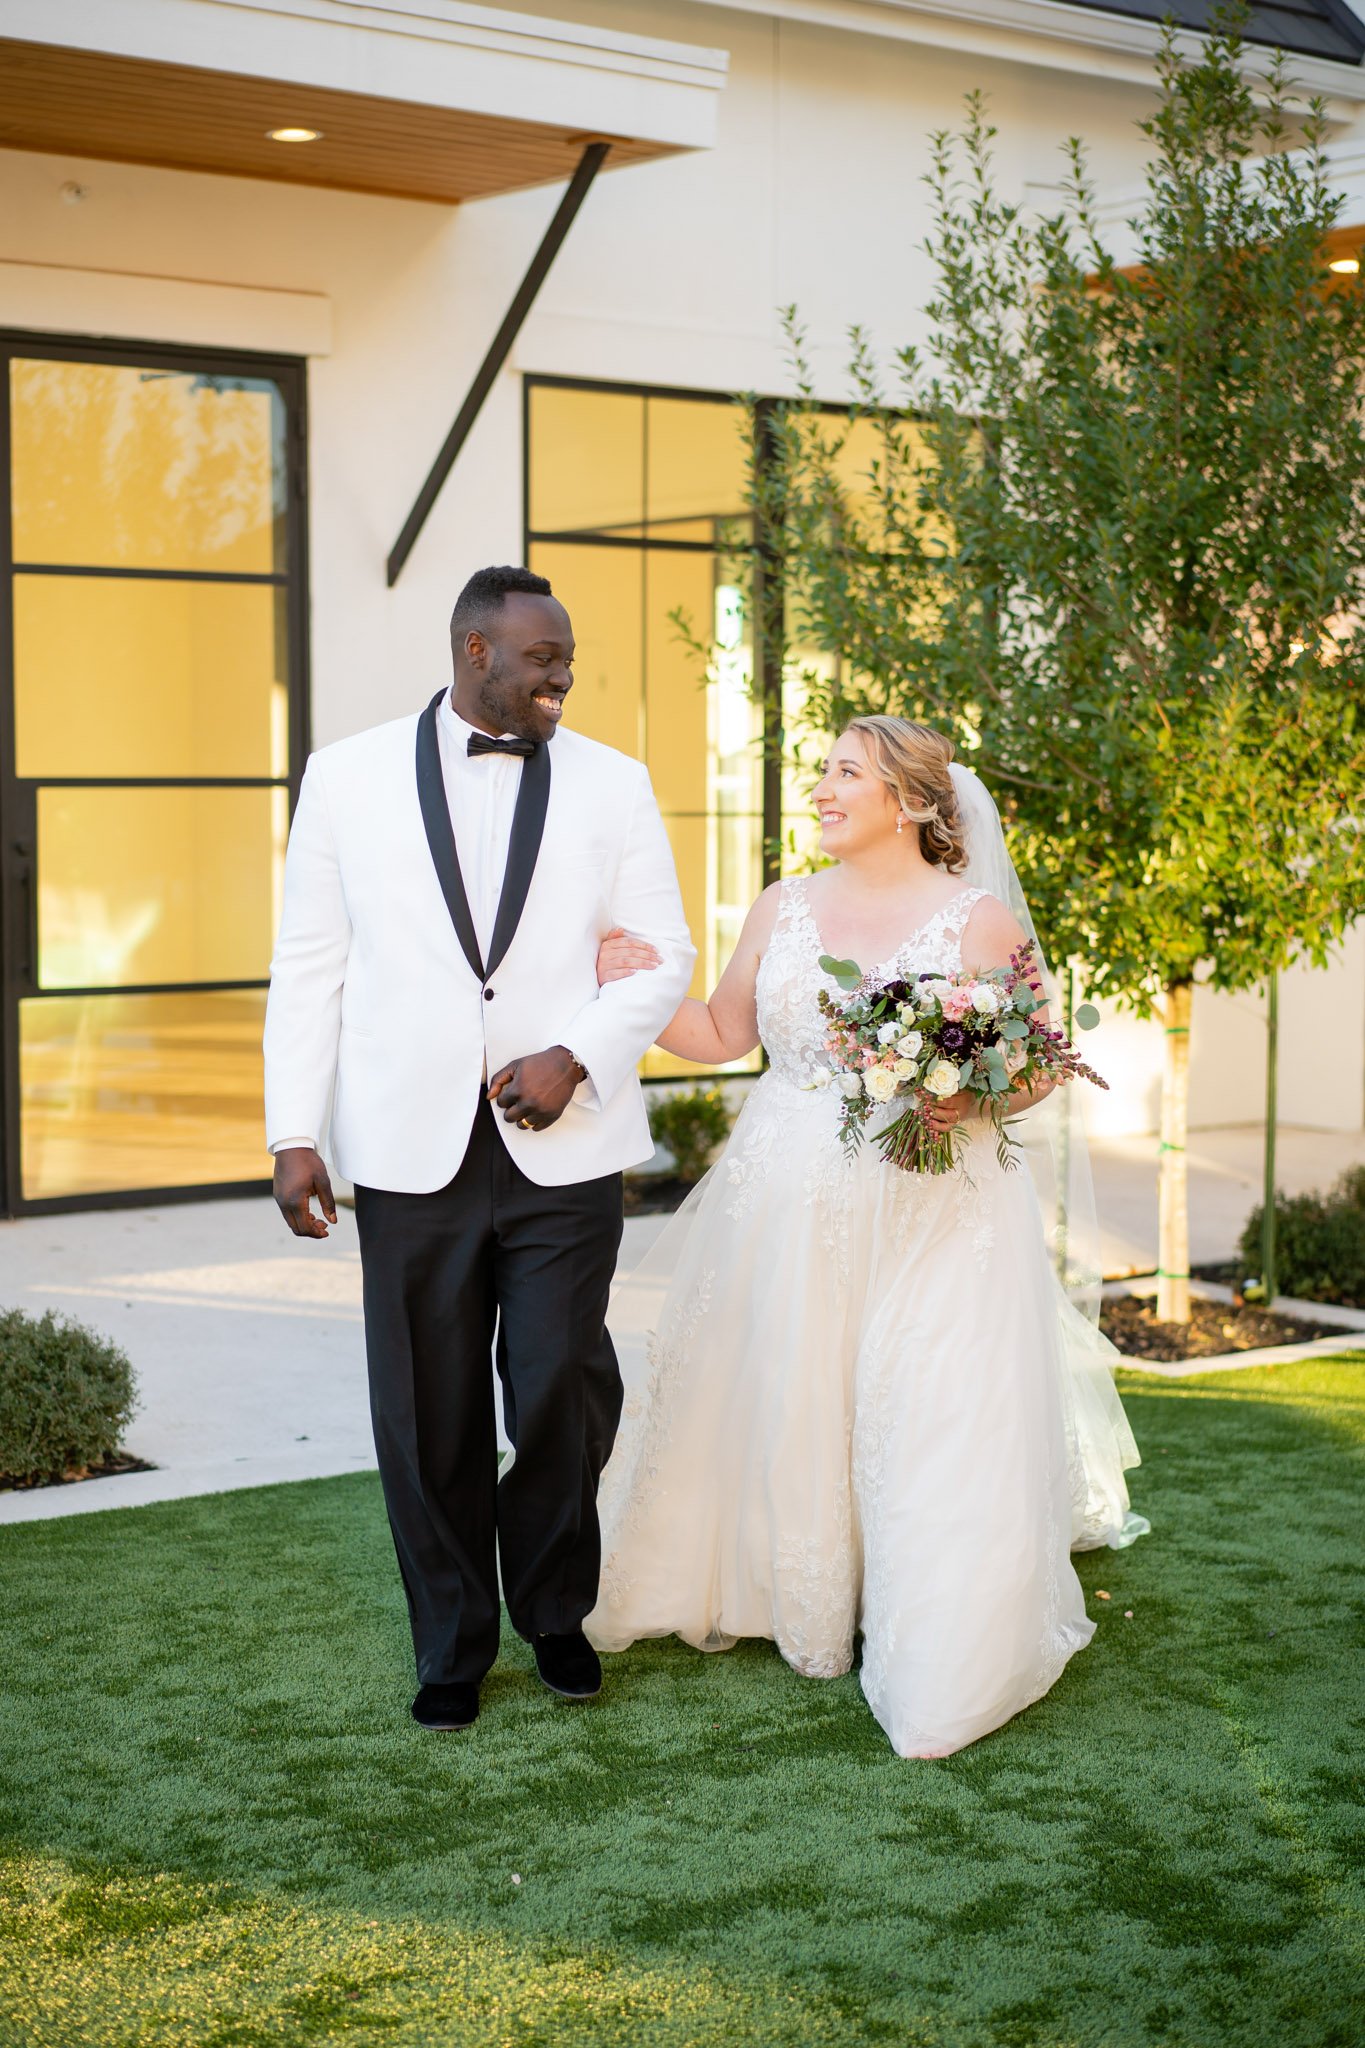 Interracial newlyweds smiling at each other walking arm in arm at The Arlo Texas The Amber Studio